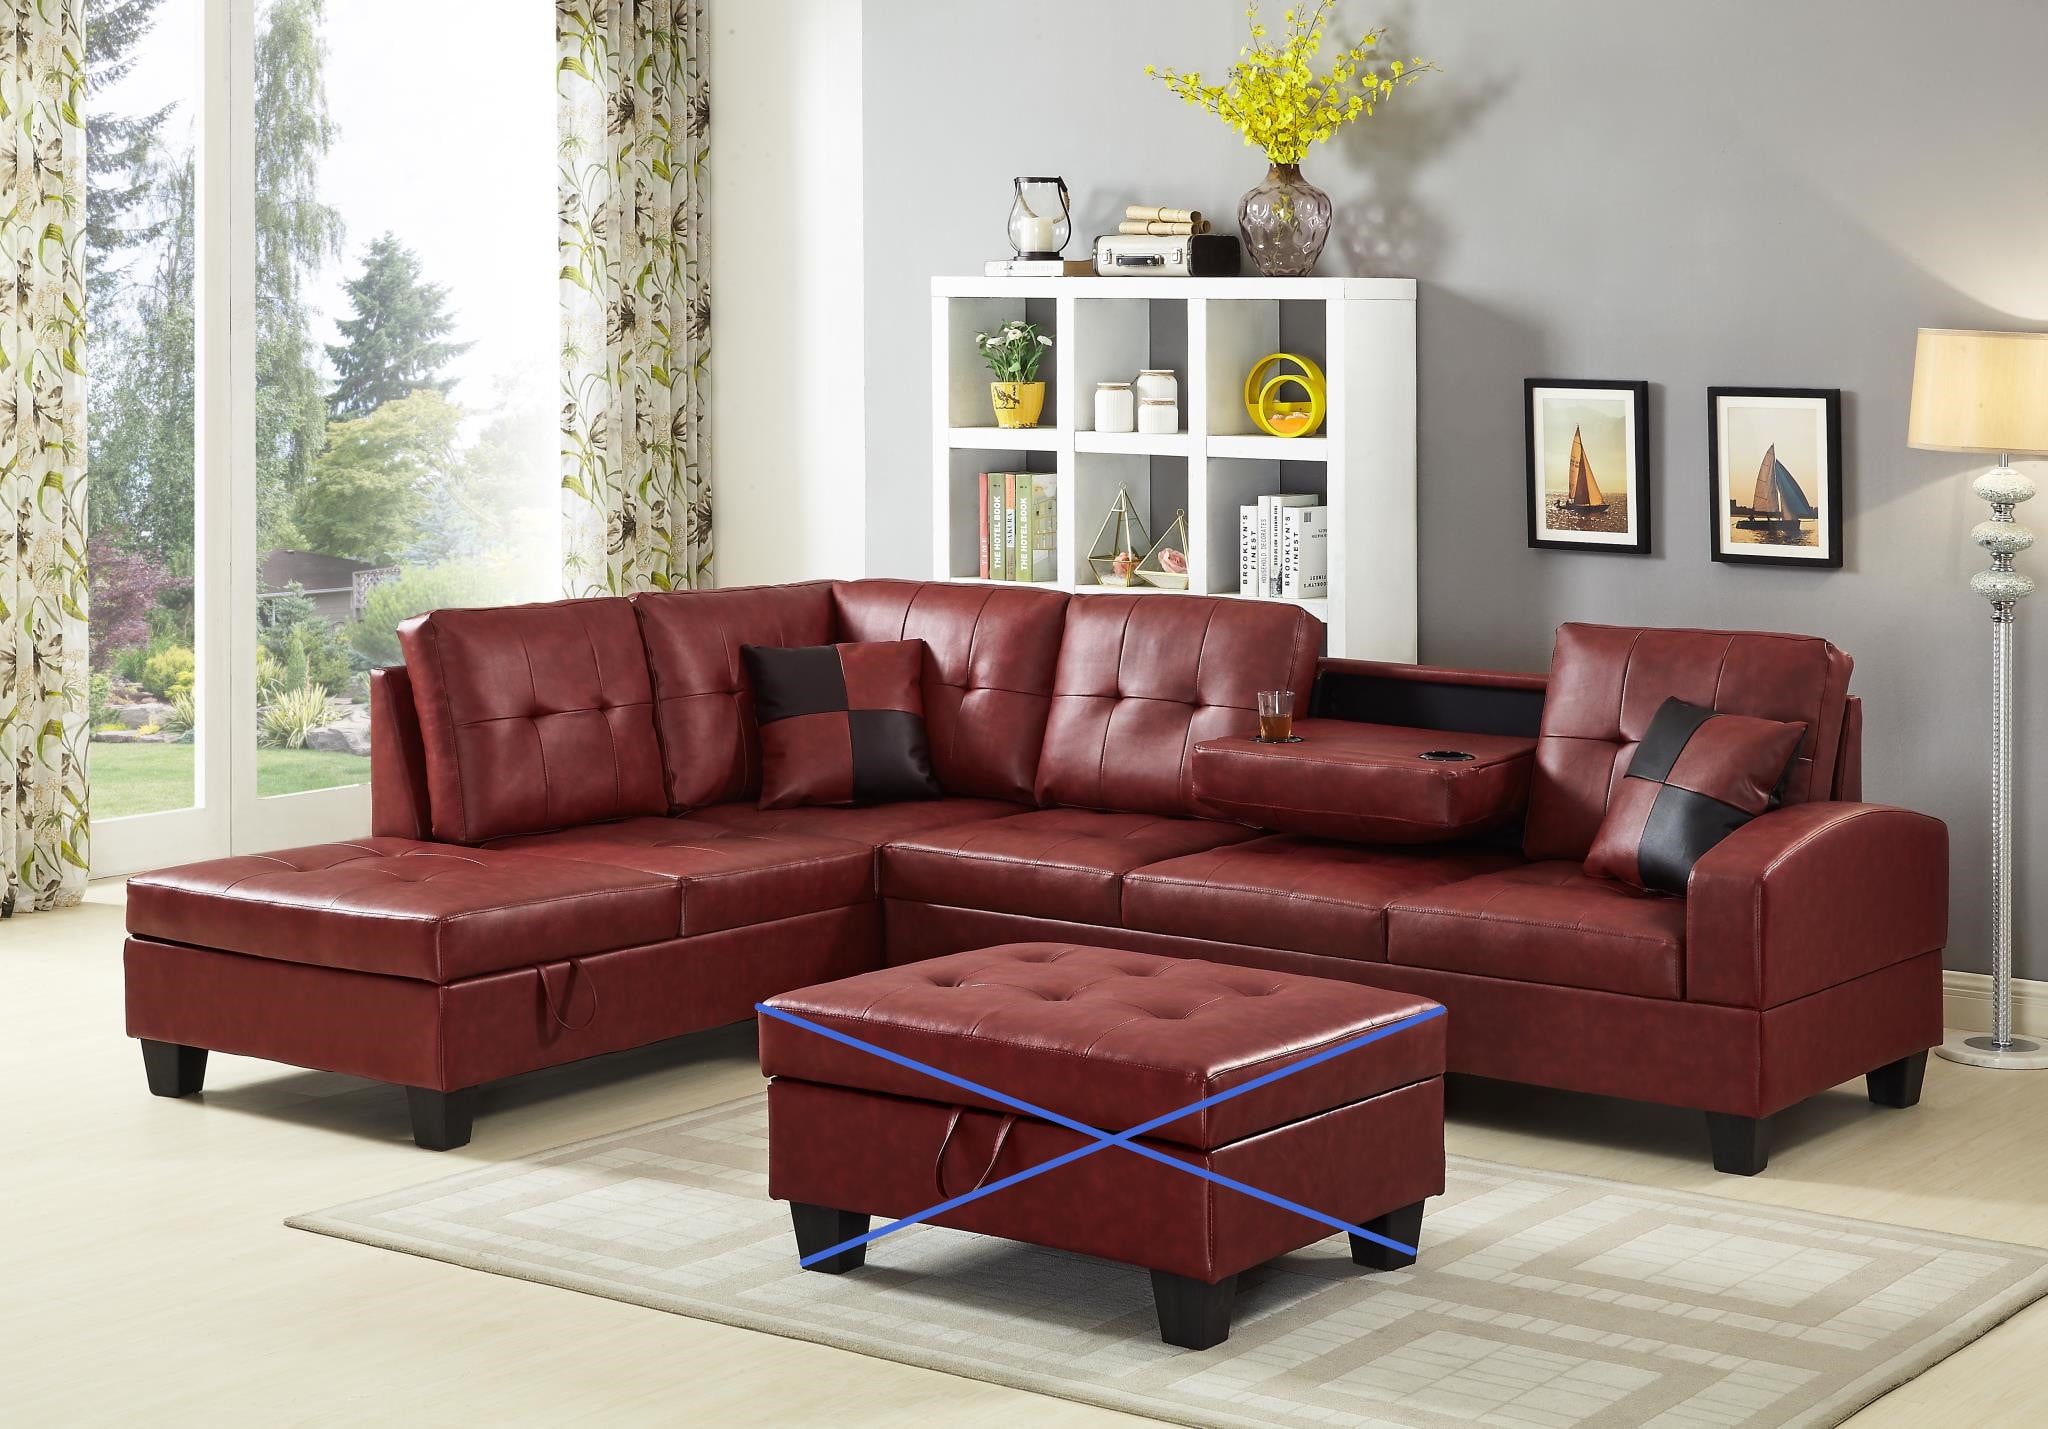 Gtu Furniture Pu Leather Living Room Irreversible Living Room Sectional Within Sofas For Living Rooms (Gallery 14 of 20)